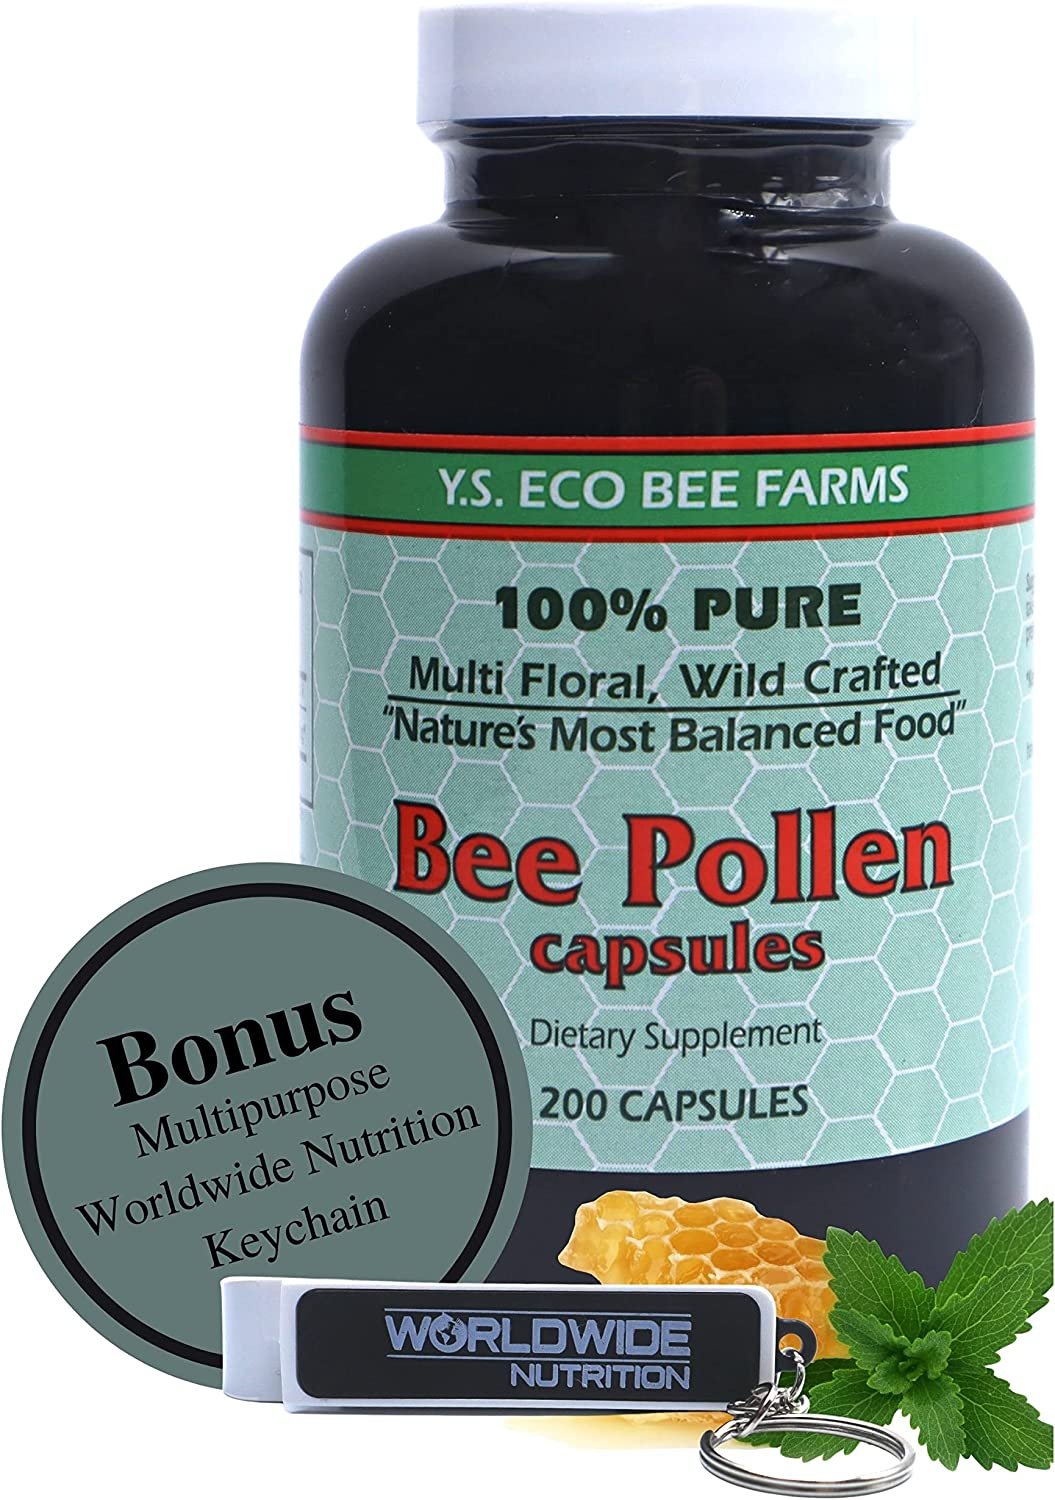 Y.S. Eco Bee Farms 100% Pure, Wild Crafted Bee Pollen Capsules - Organic Bee Pollen Vitamin Supplements Amino Acids, Organic Protein, Vitamin C, Vitamin B12 Gluten Free - 200ct with Bonus Key Chain